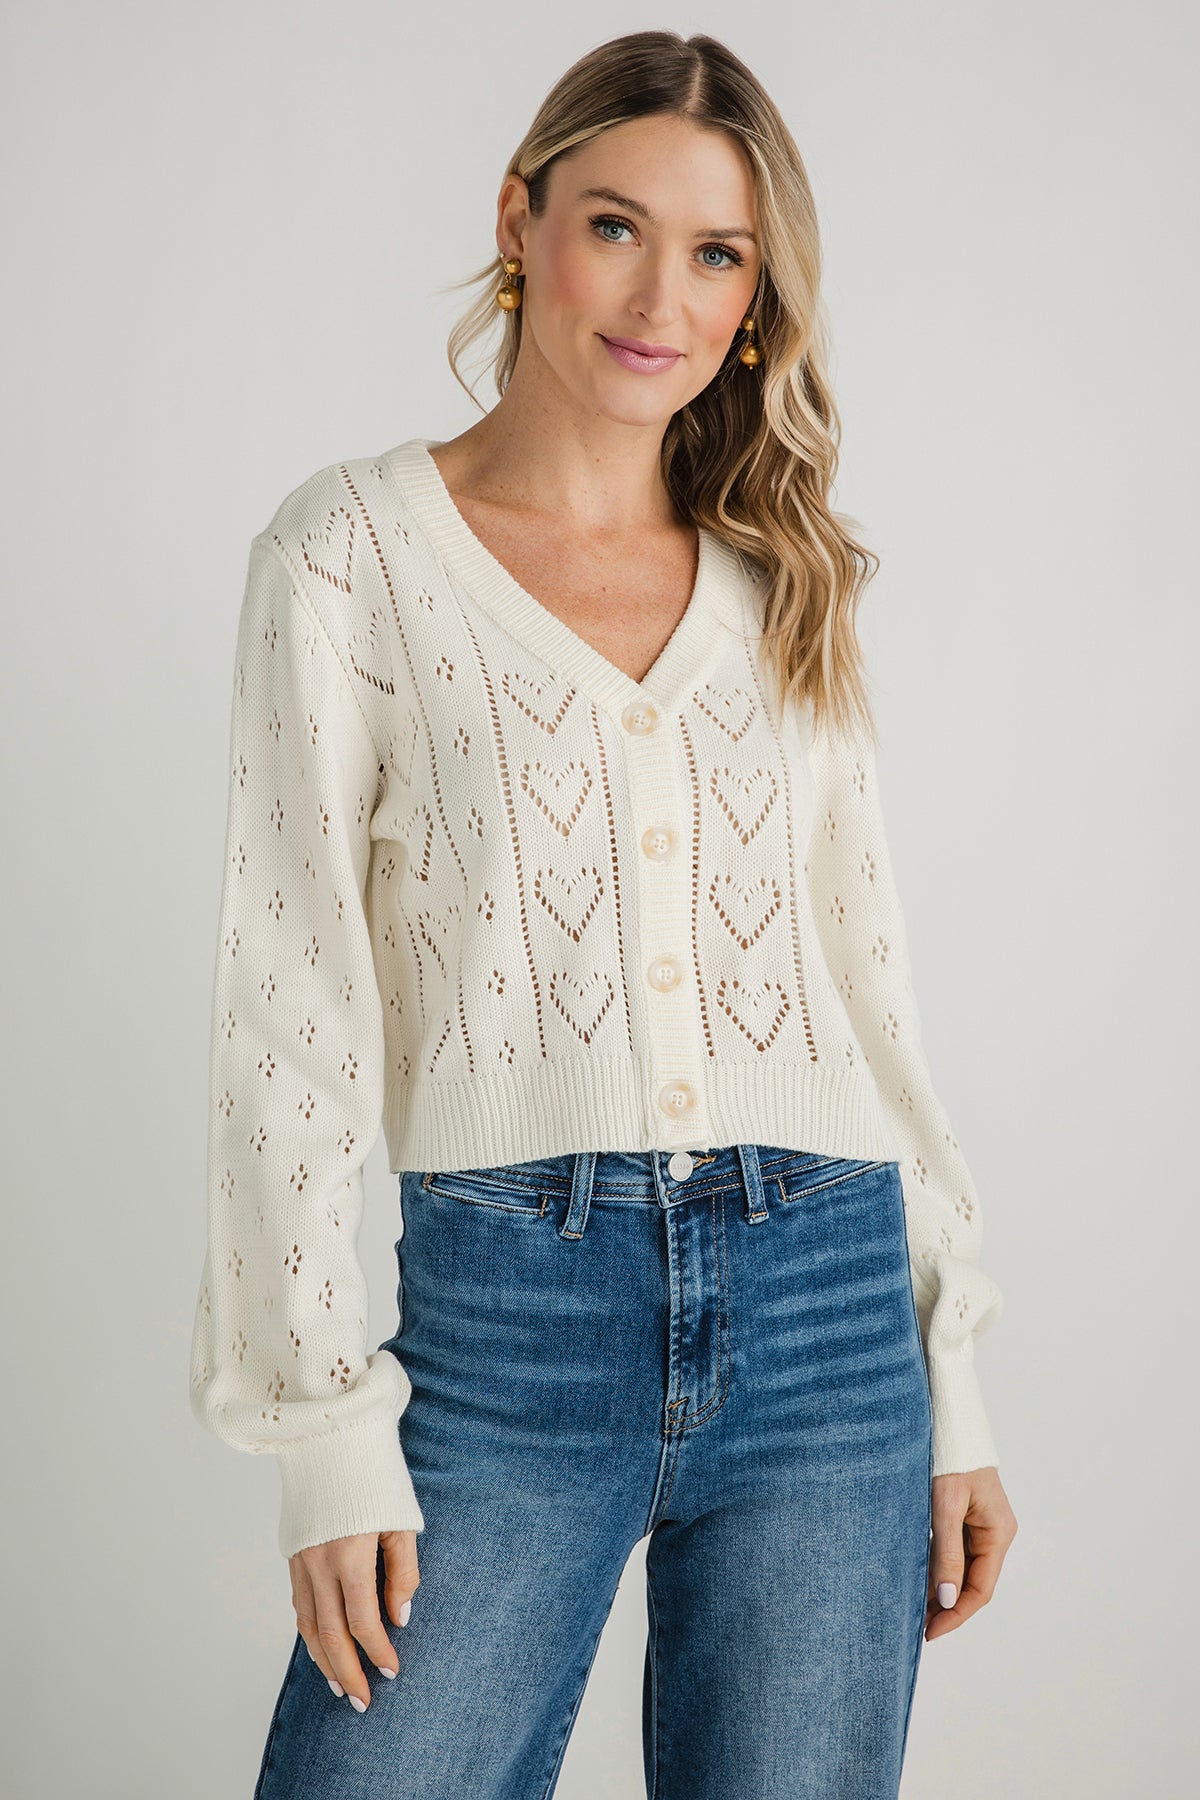 Heartprint Threads  Get Cozy, Give Back